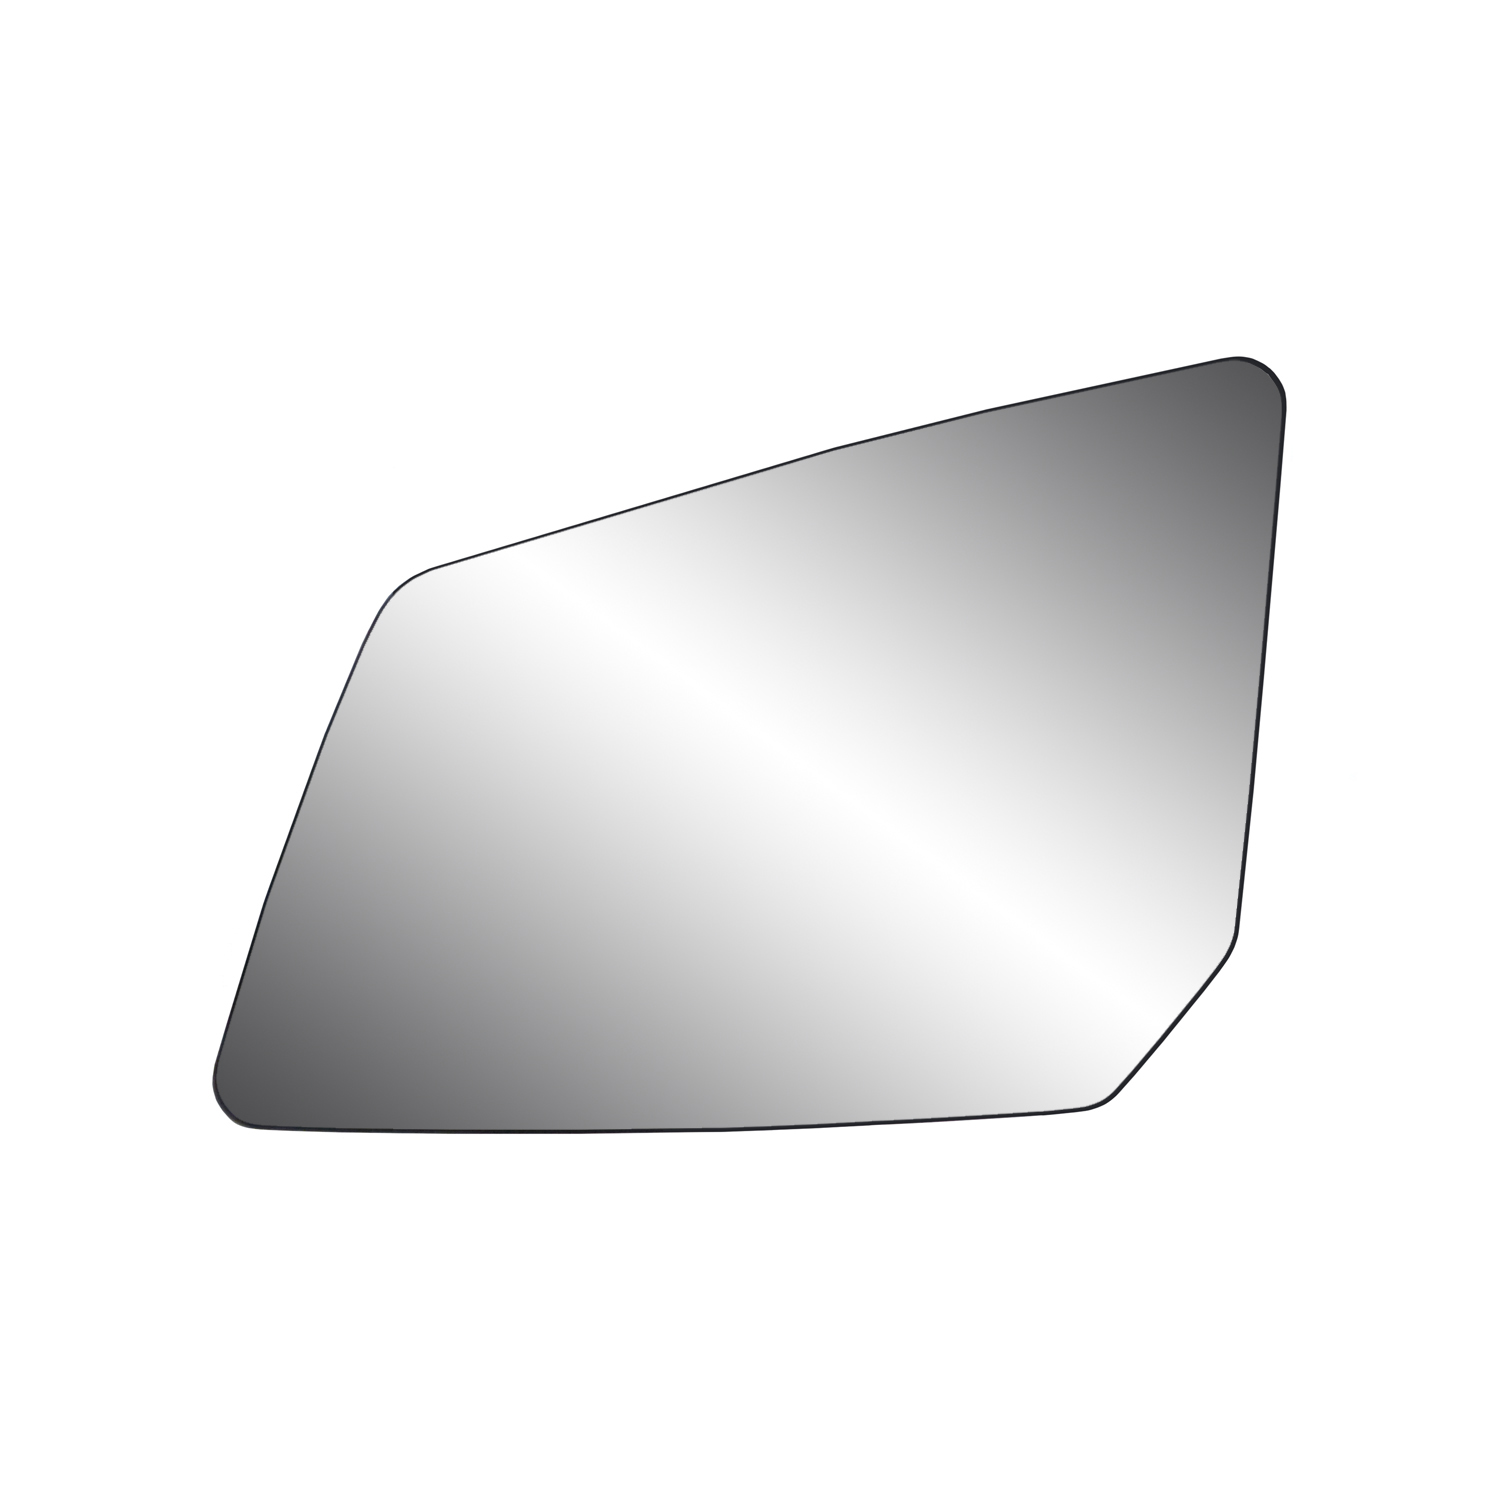 Fit System 99076 Saturn Driver/Passenger Side Replacement Mirror Glass